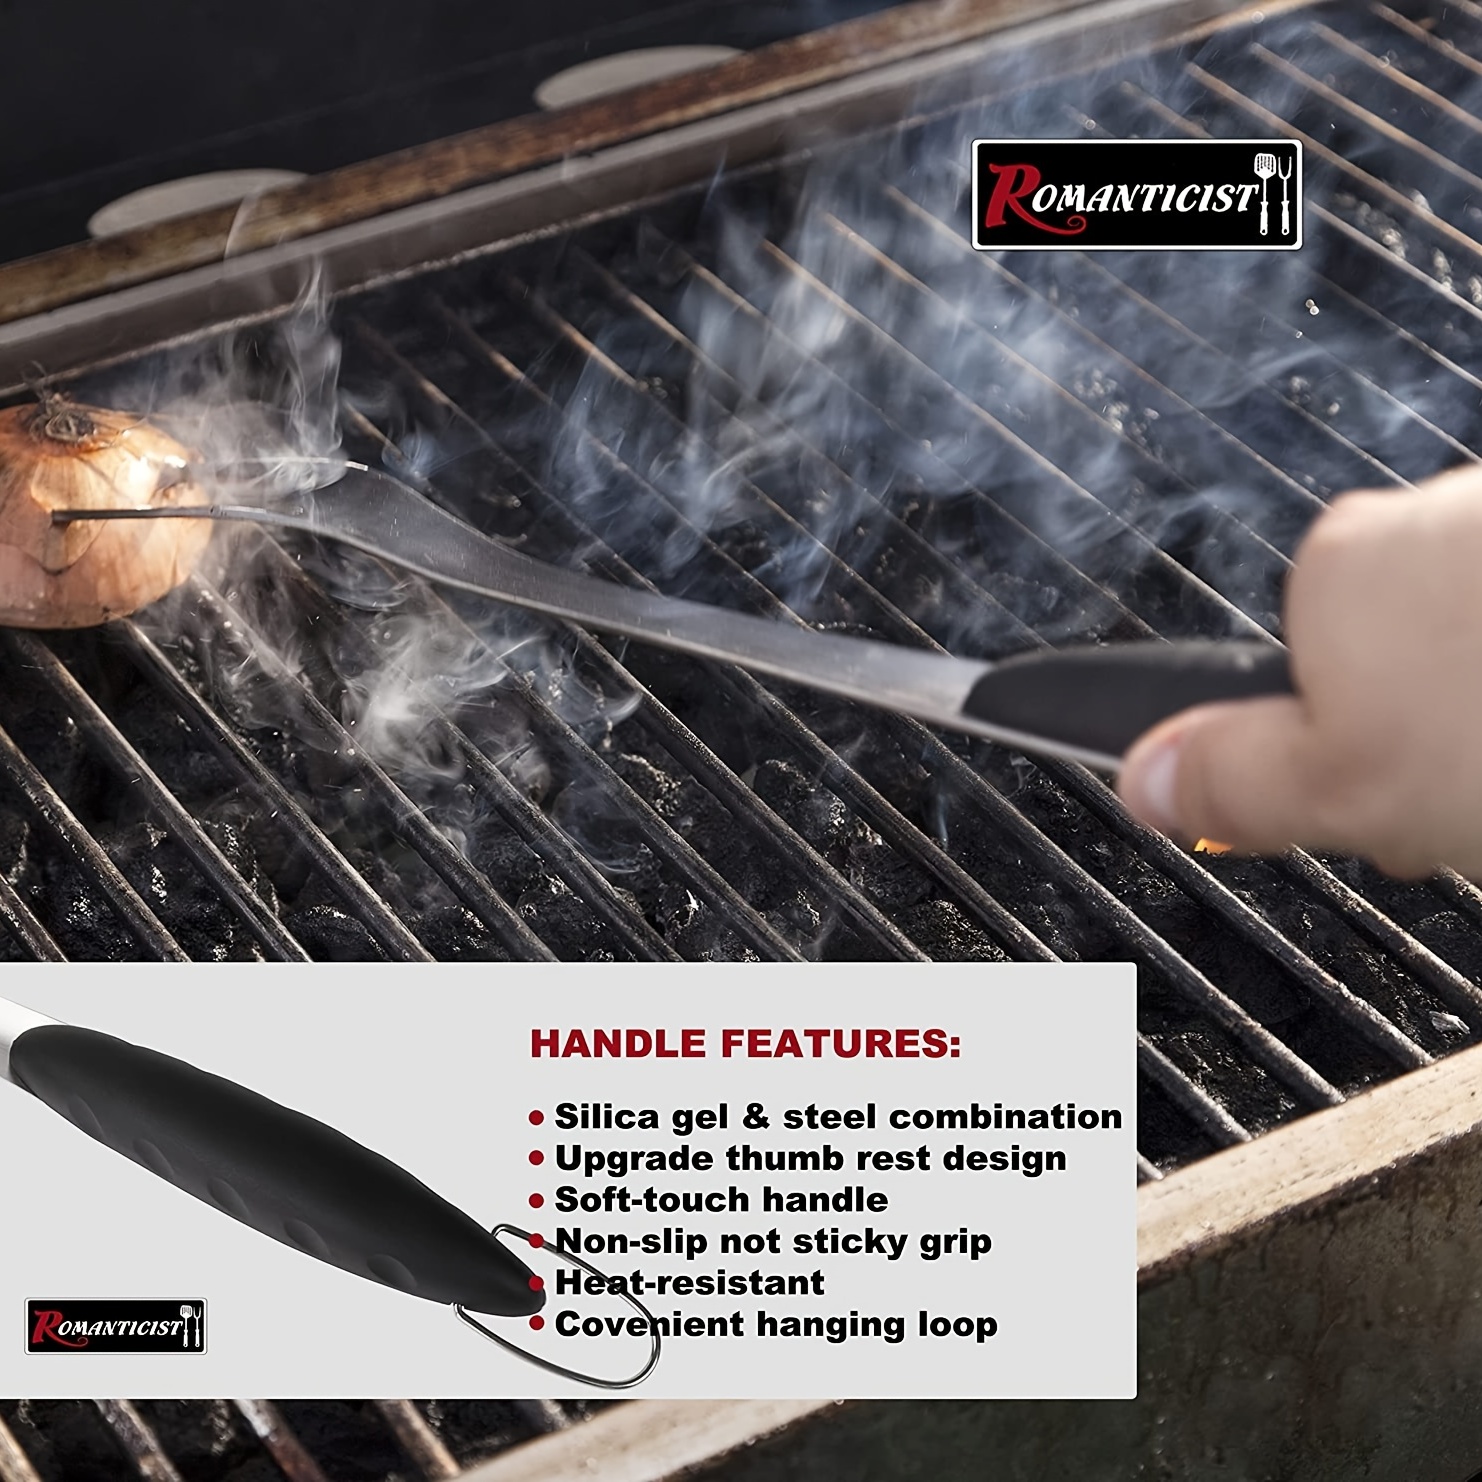 Best grilling accessories: Chefs recommend their favorite grilling tools